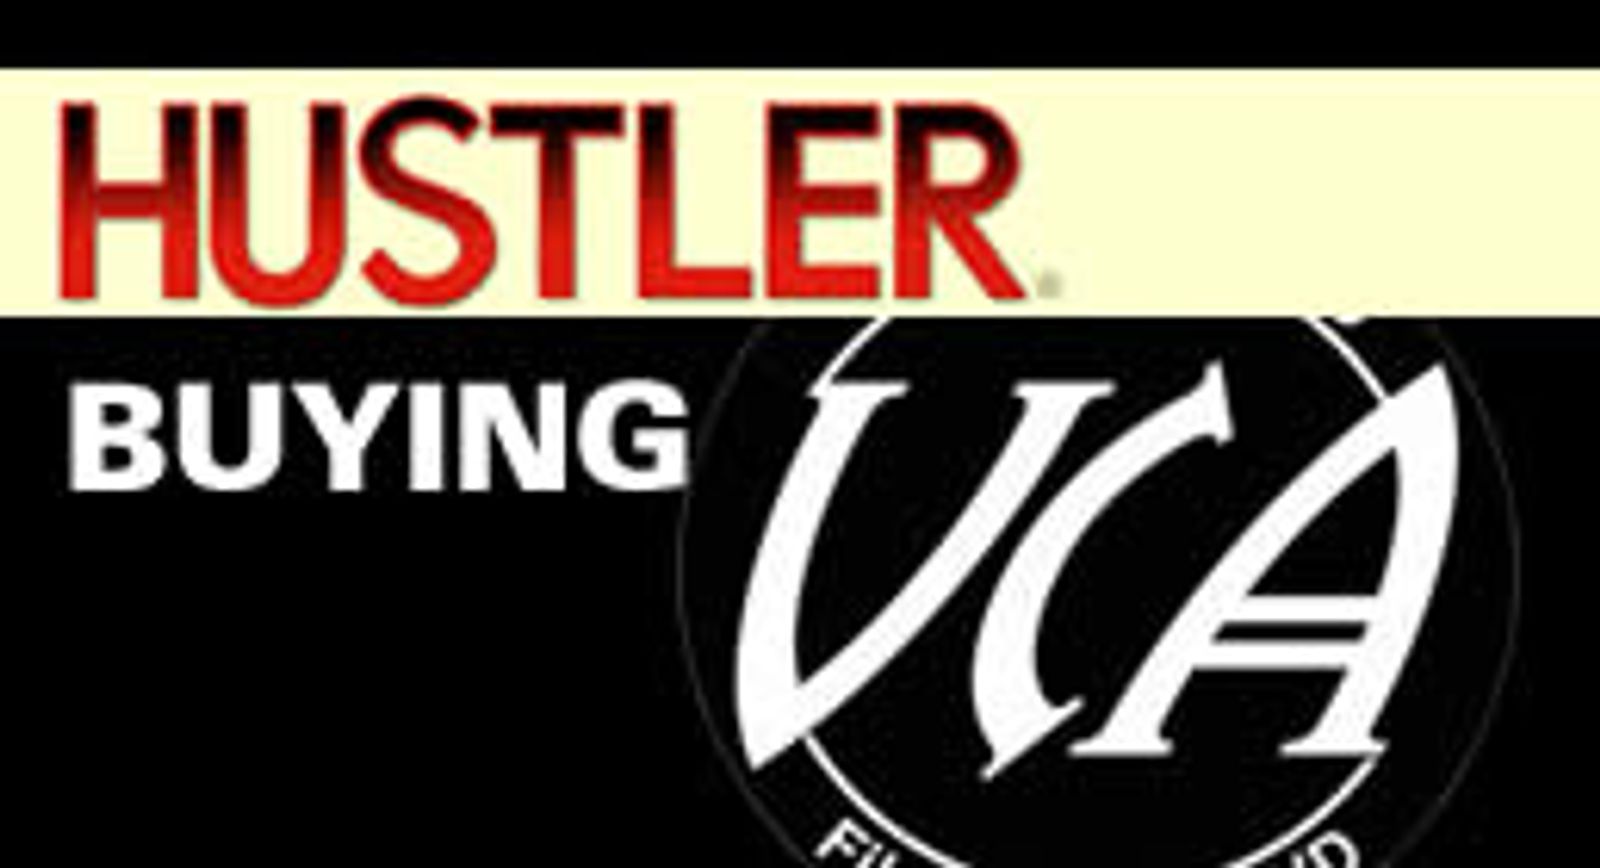 It's Now Official: Hustler Acquires VCA; Deal Comes a Year After Vivid Pact, Cementing Hustler As...